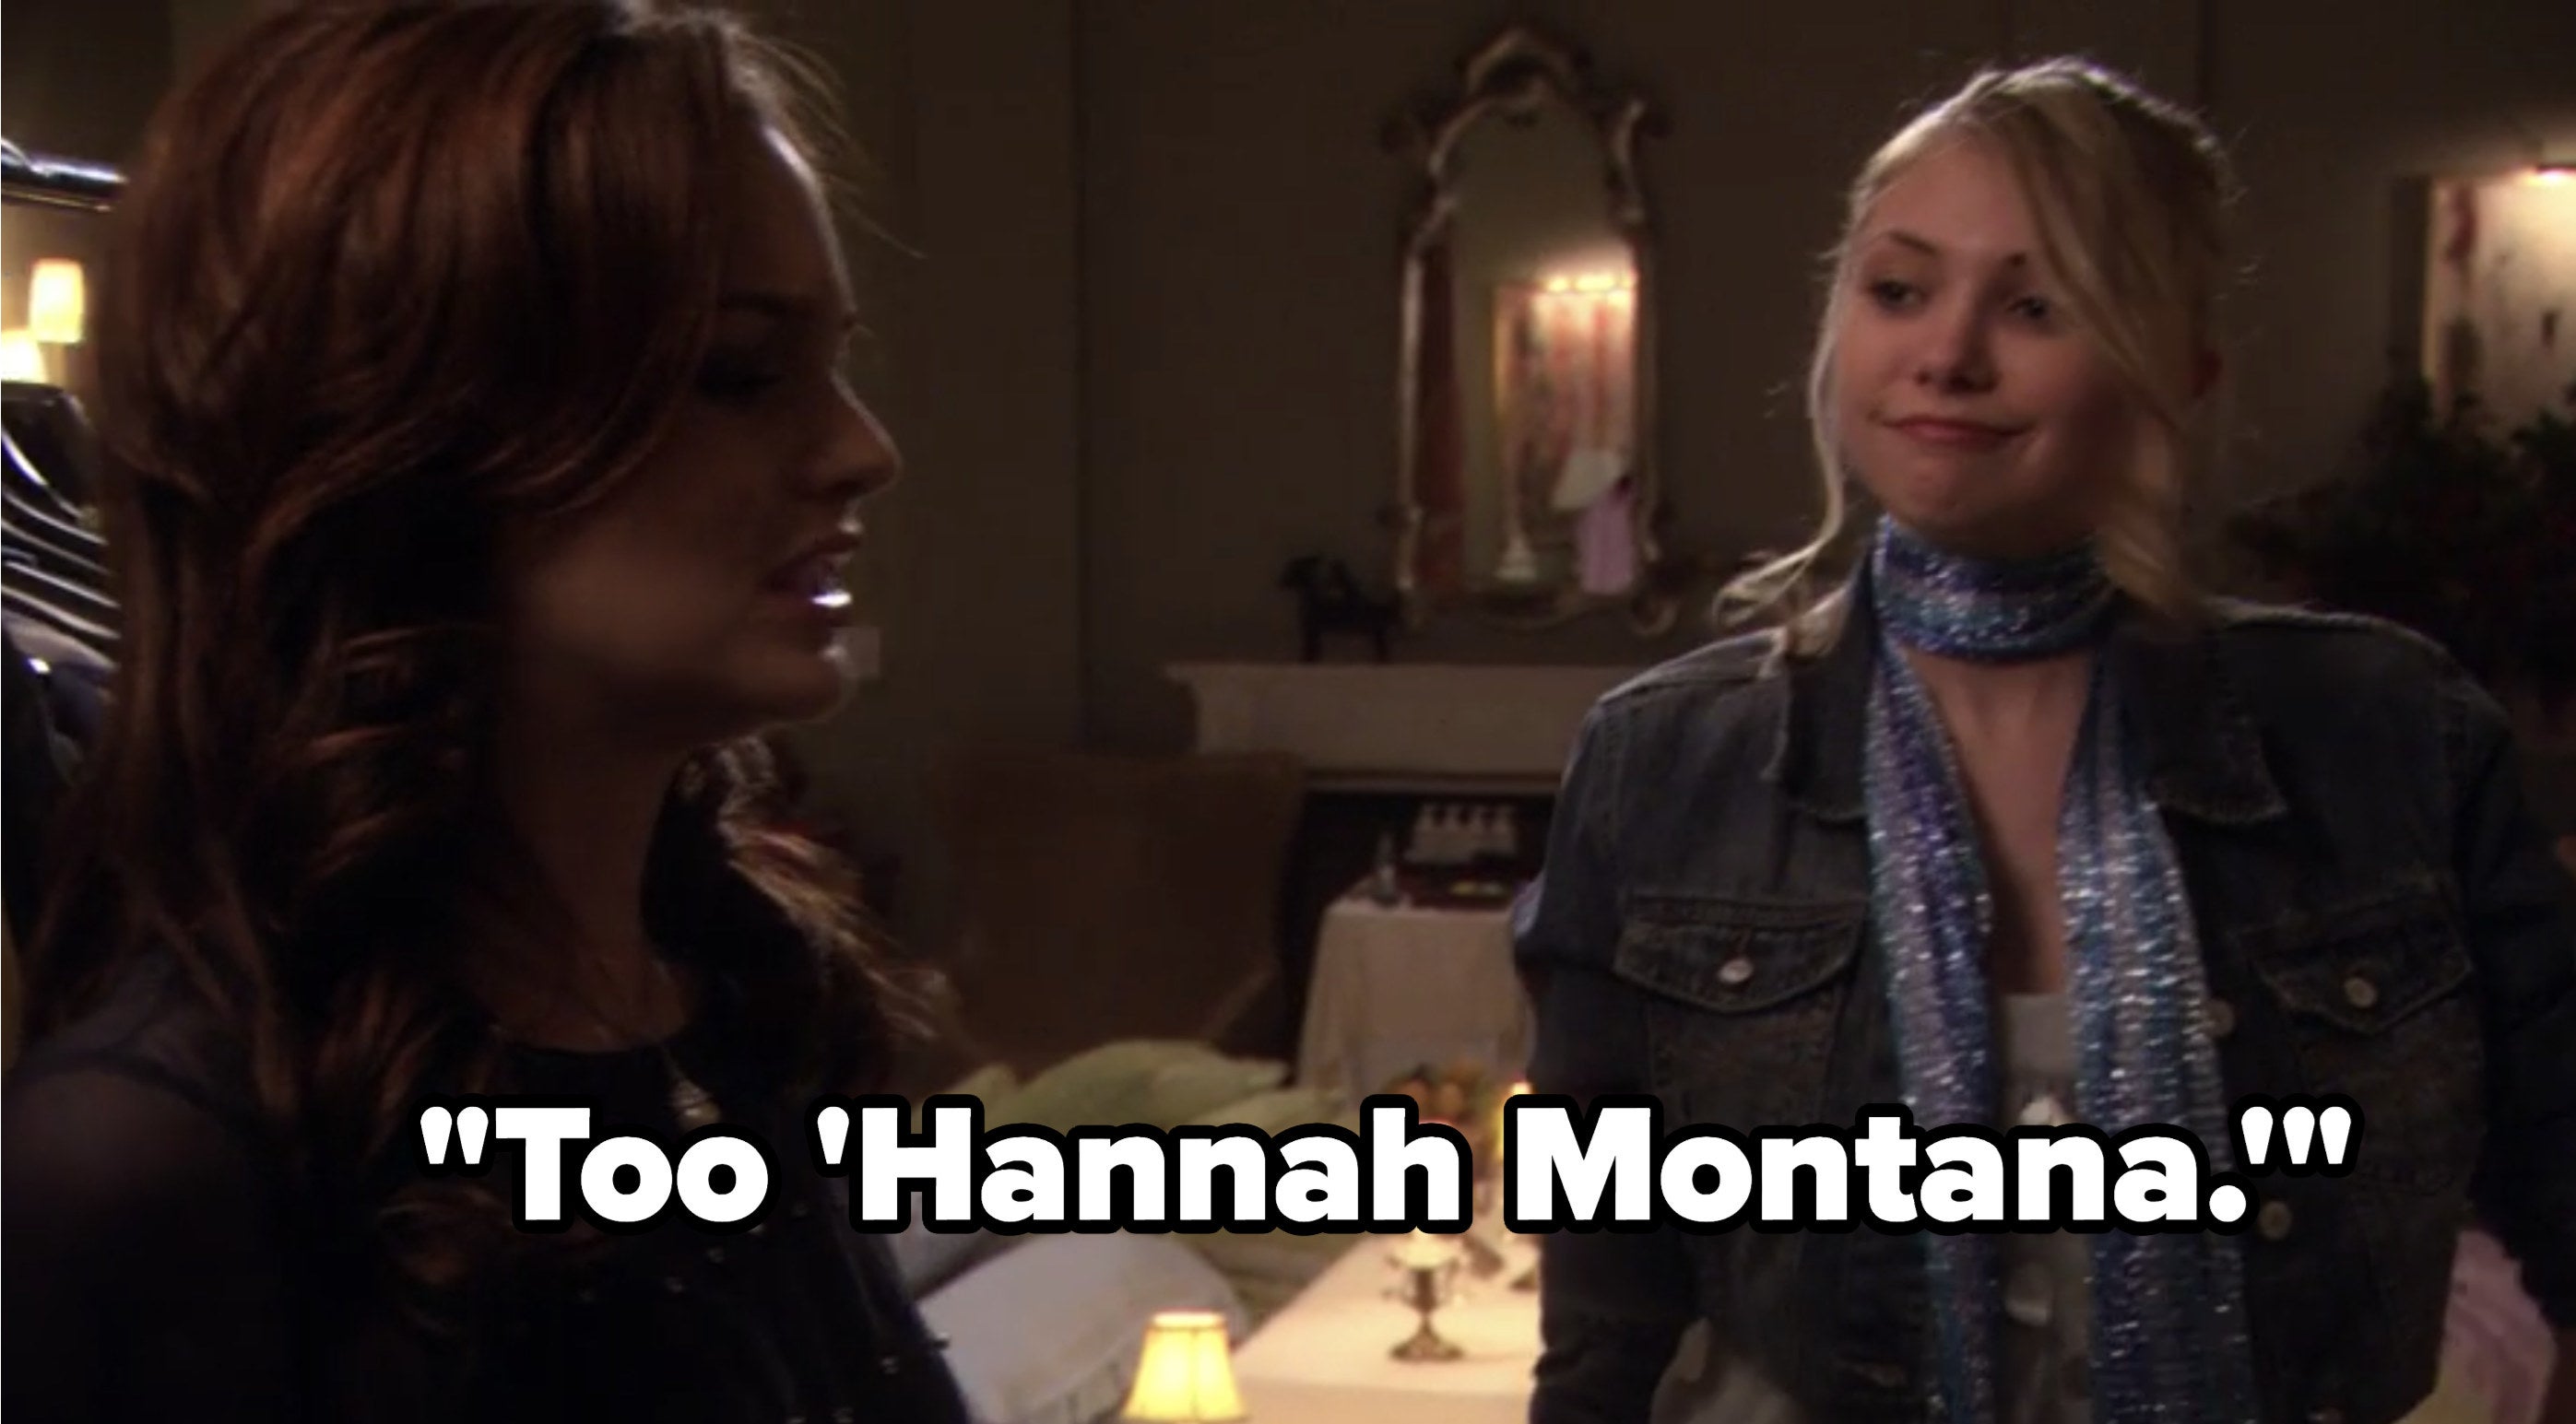 Blair says &quot;Too &#x27;Hannah Montana&#x27;&quot; of Jenny&#x27;s outfit